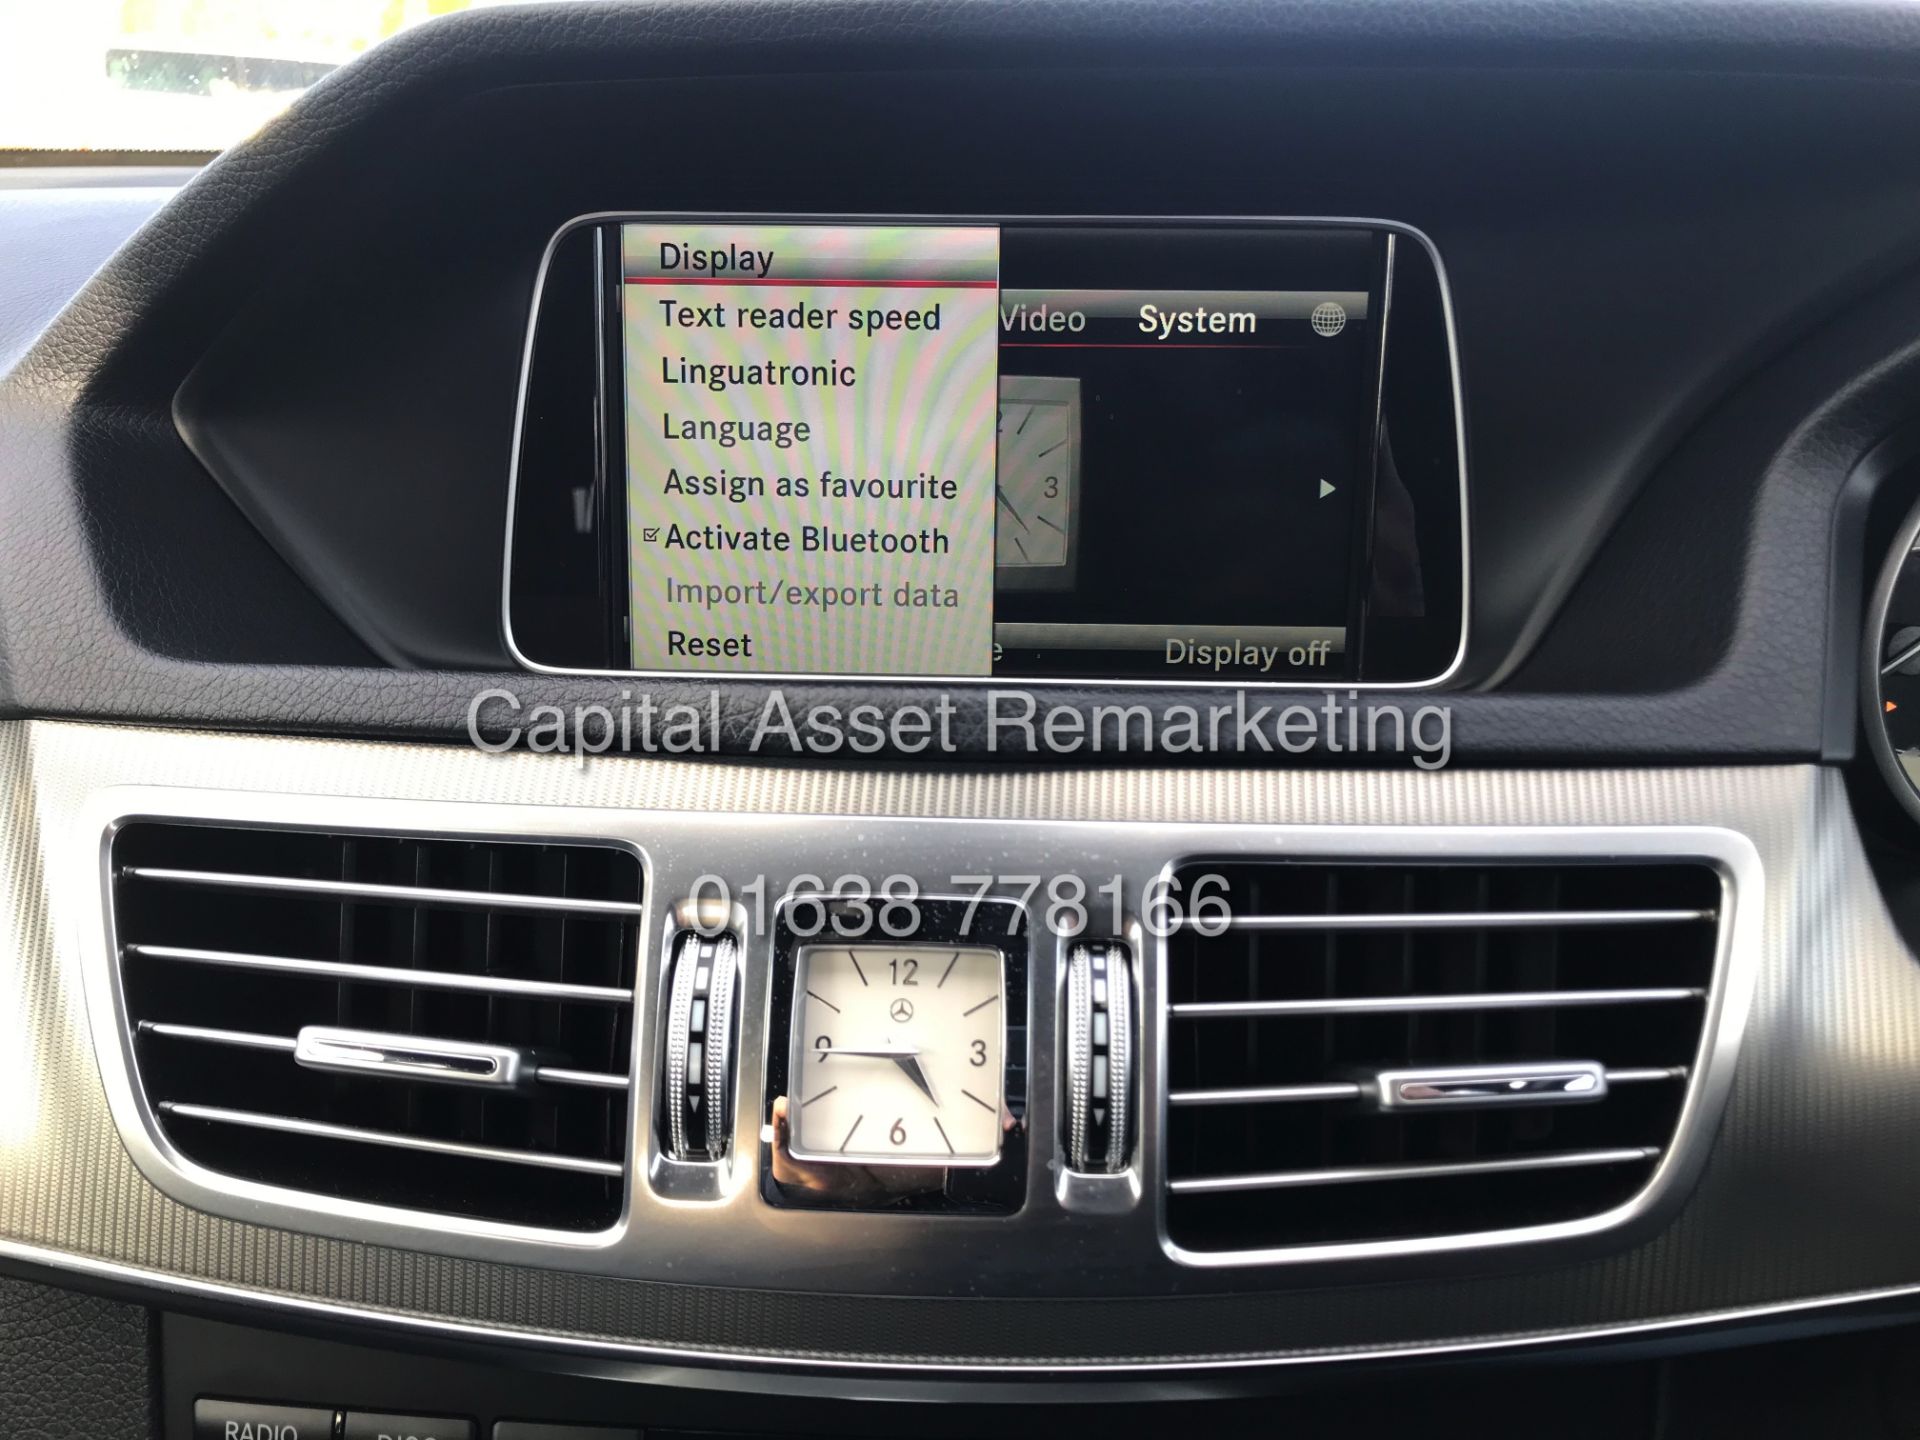 MERCEDES E220d "SPECIAL EQUIPMENT" 7G TRONIC AUTO (2015 MODEL) 1 OWNER - SAT NAV - LEATHER - Image 20 of 26